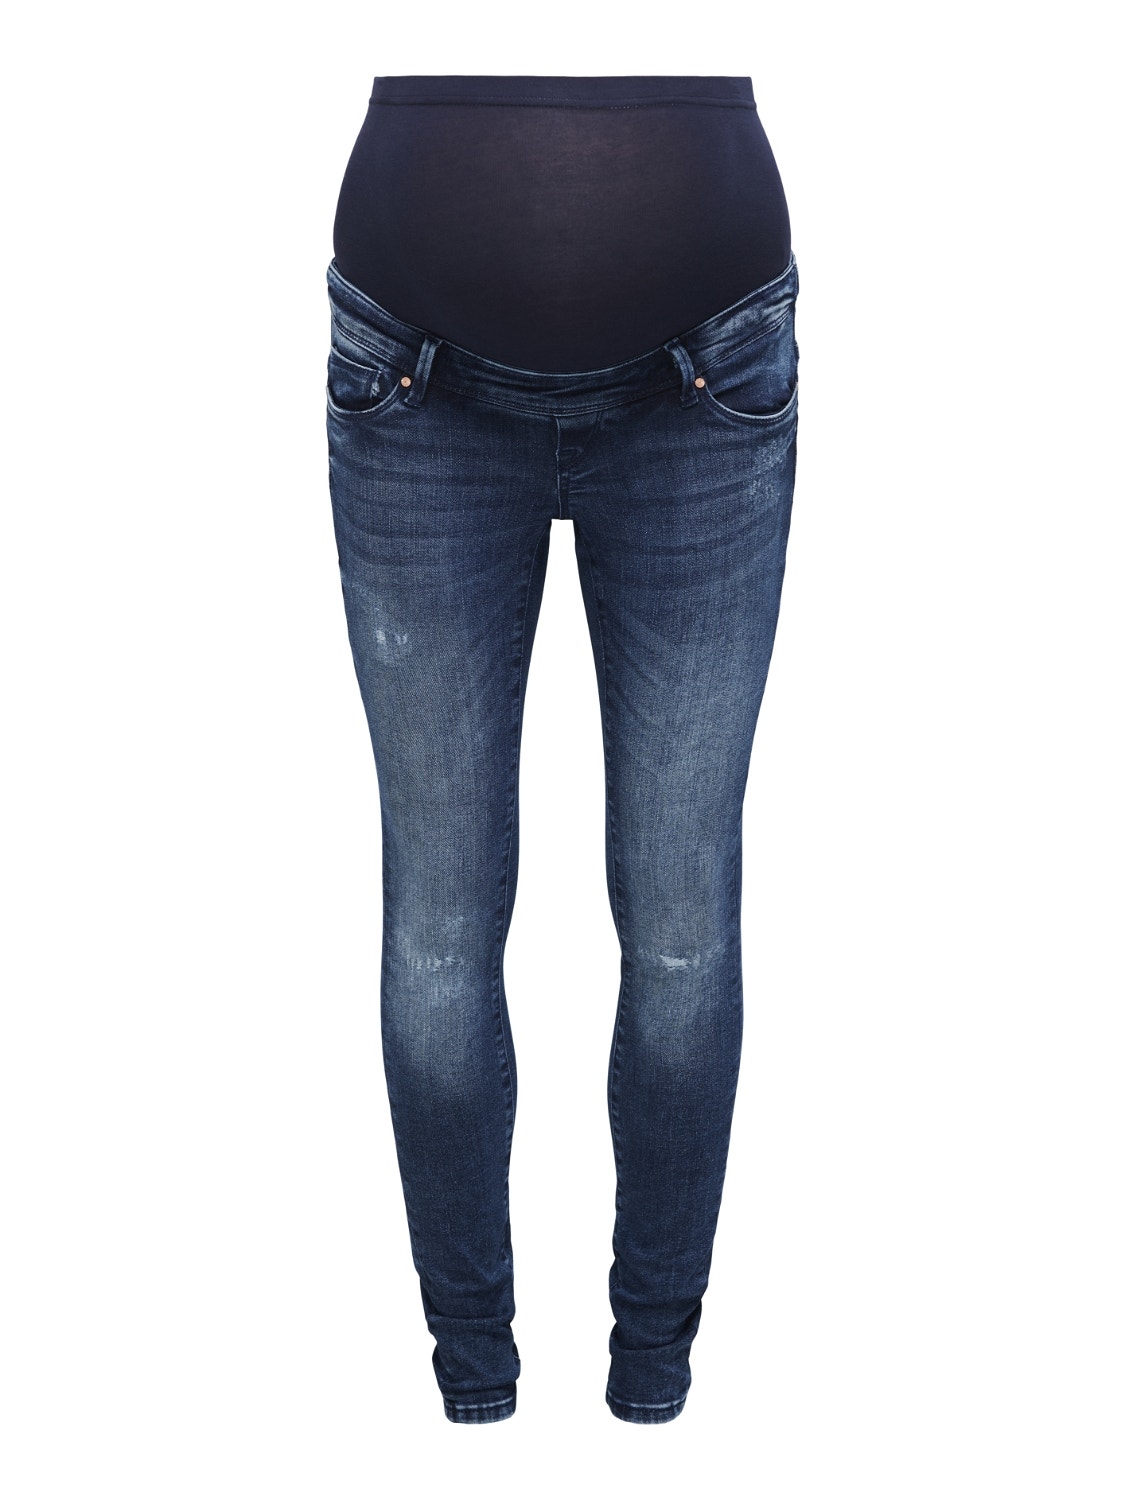 ONLY Jeans Skinny Fit Taille moyenne -Dark Blue Denim - 15254187